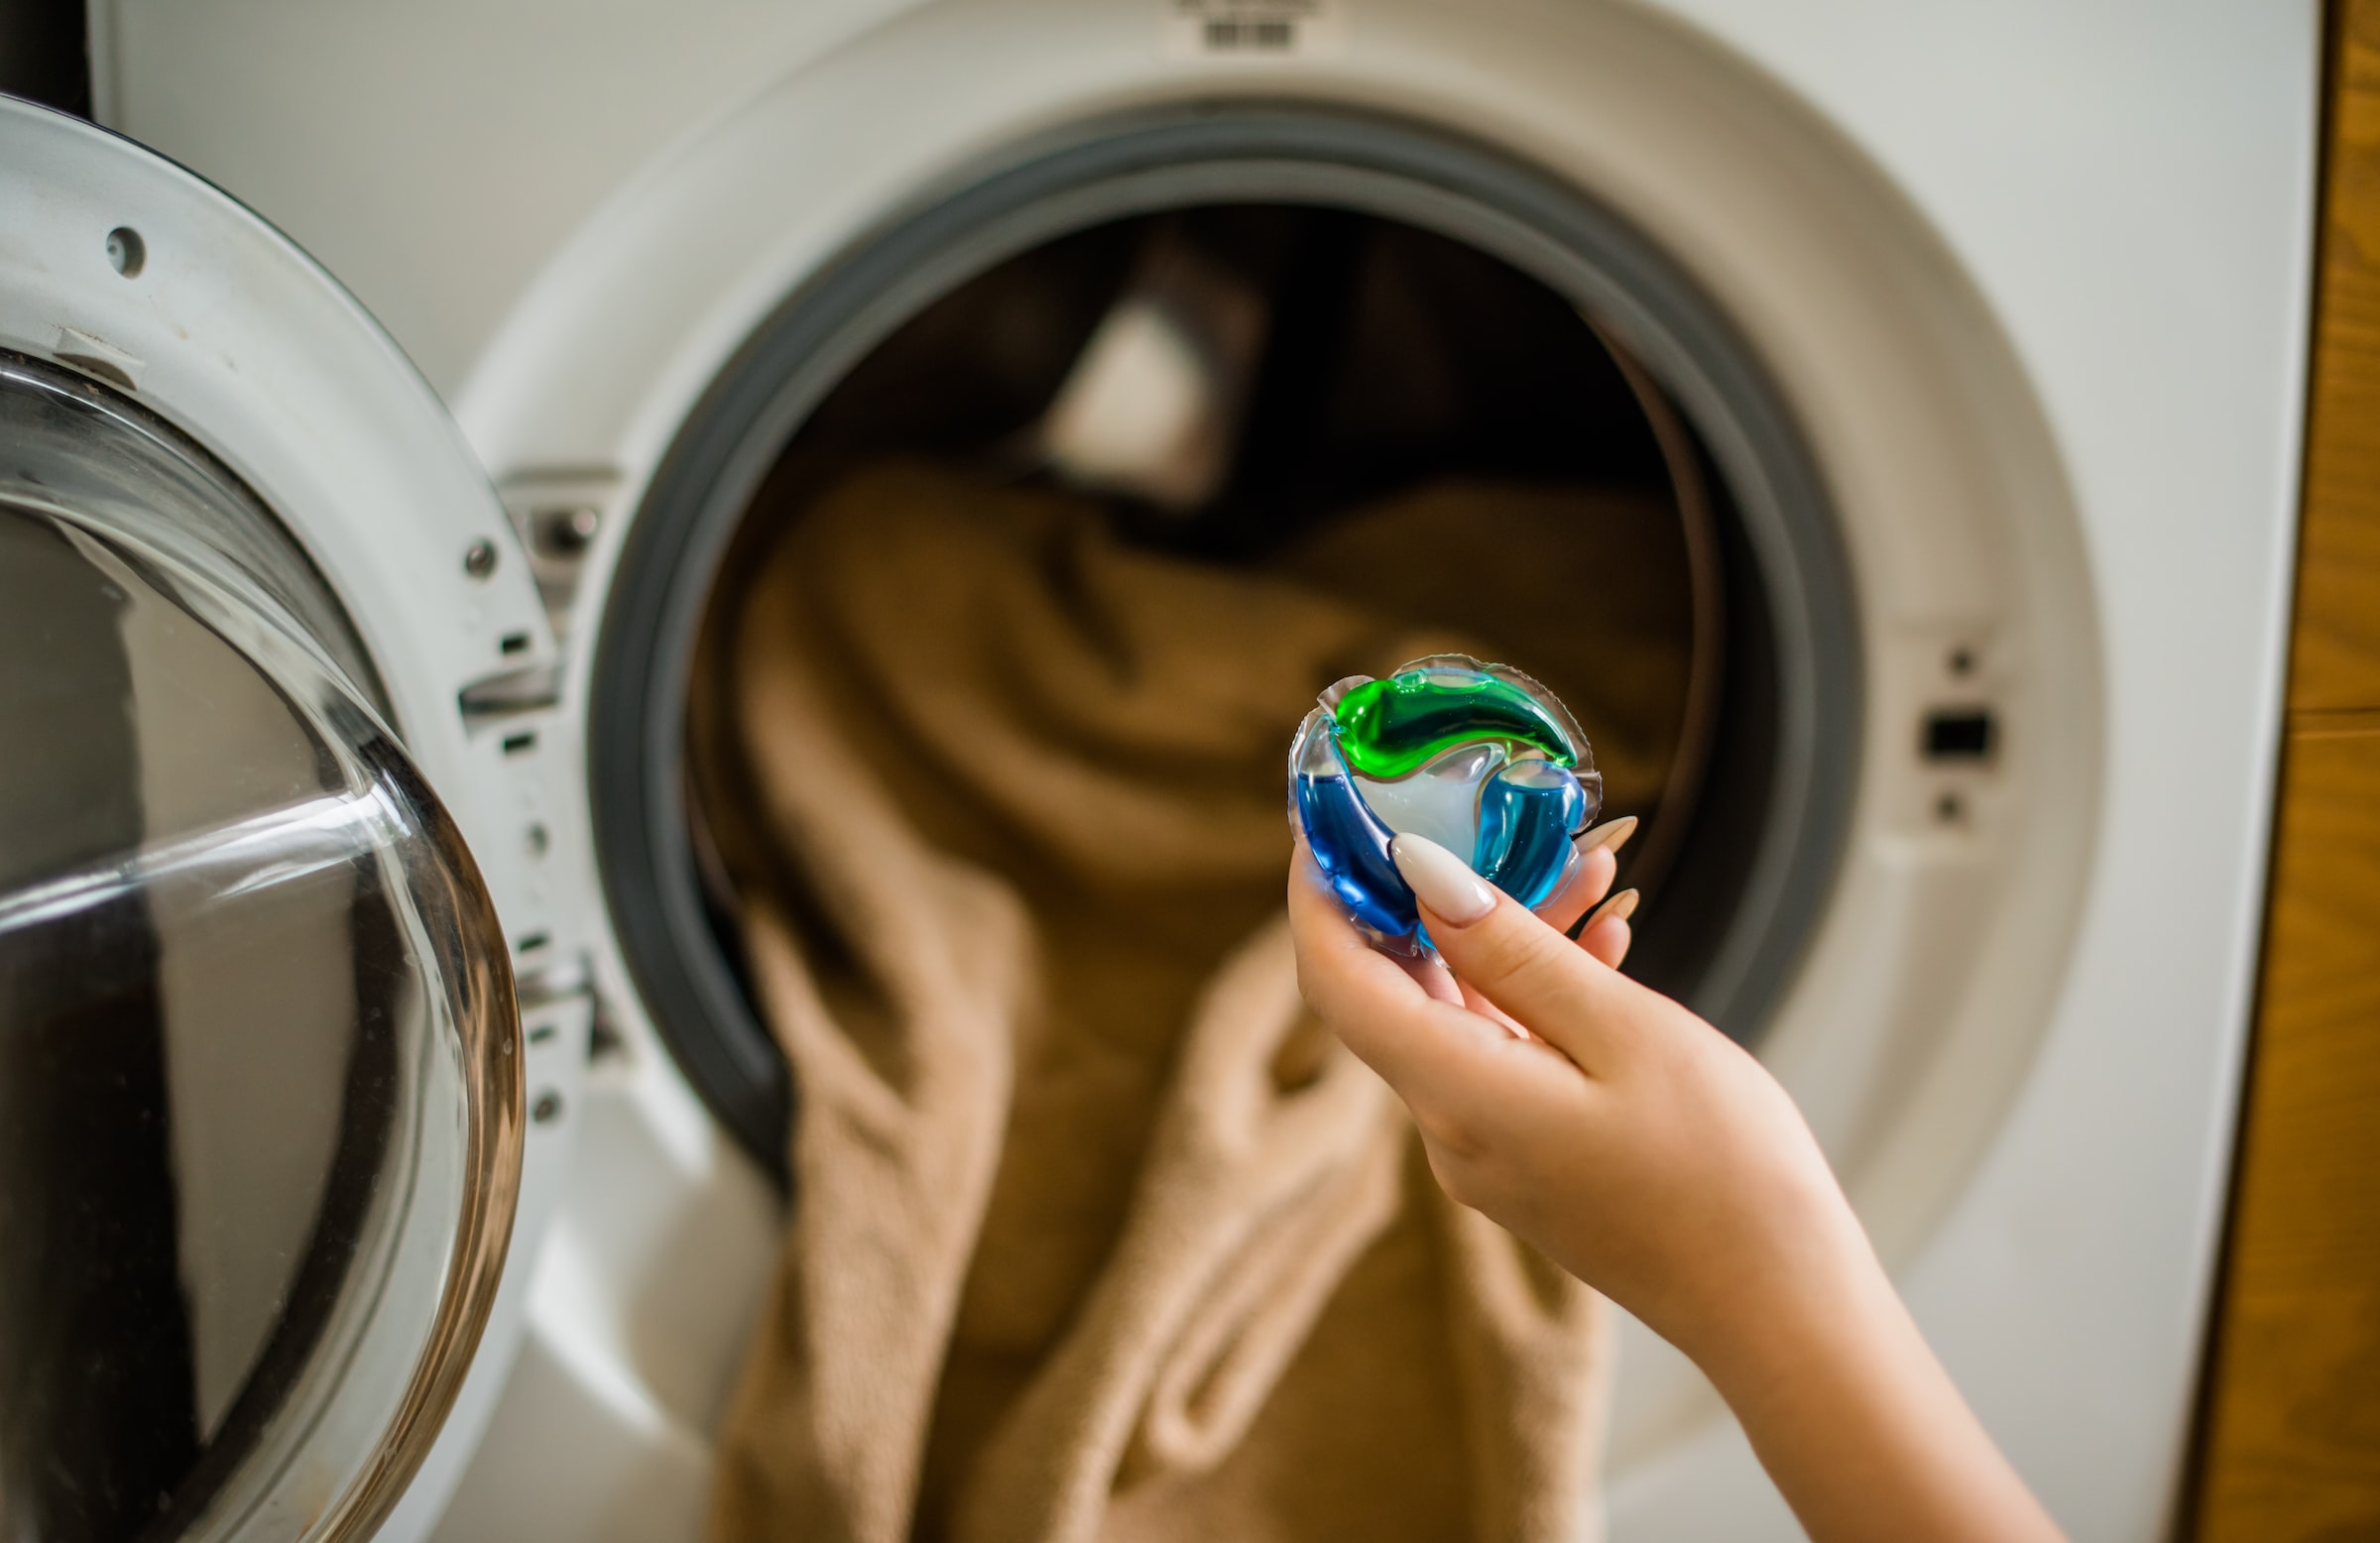 A laundry detergent pod is held up in front of a laundry machine